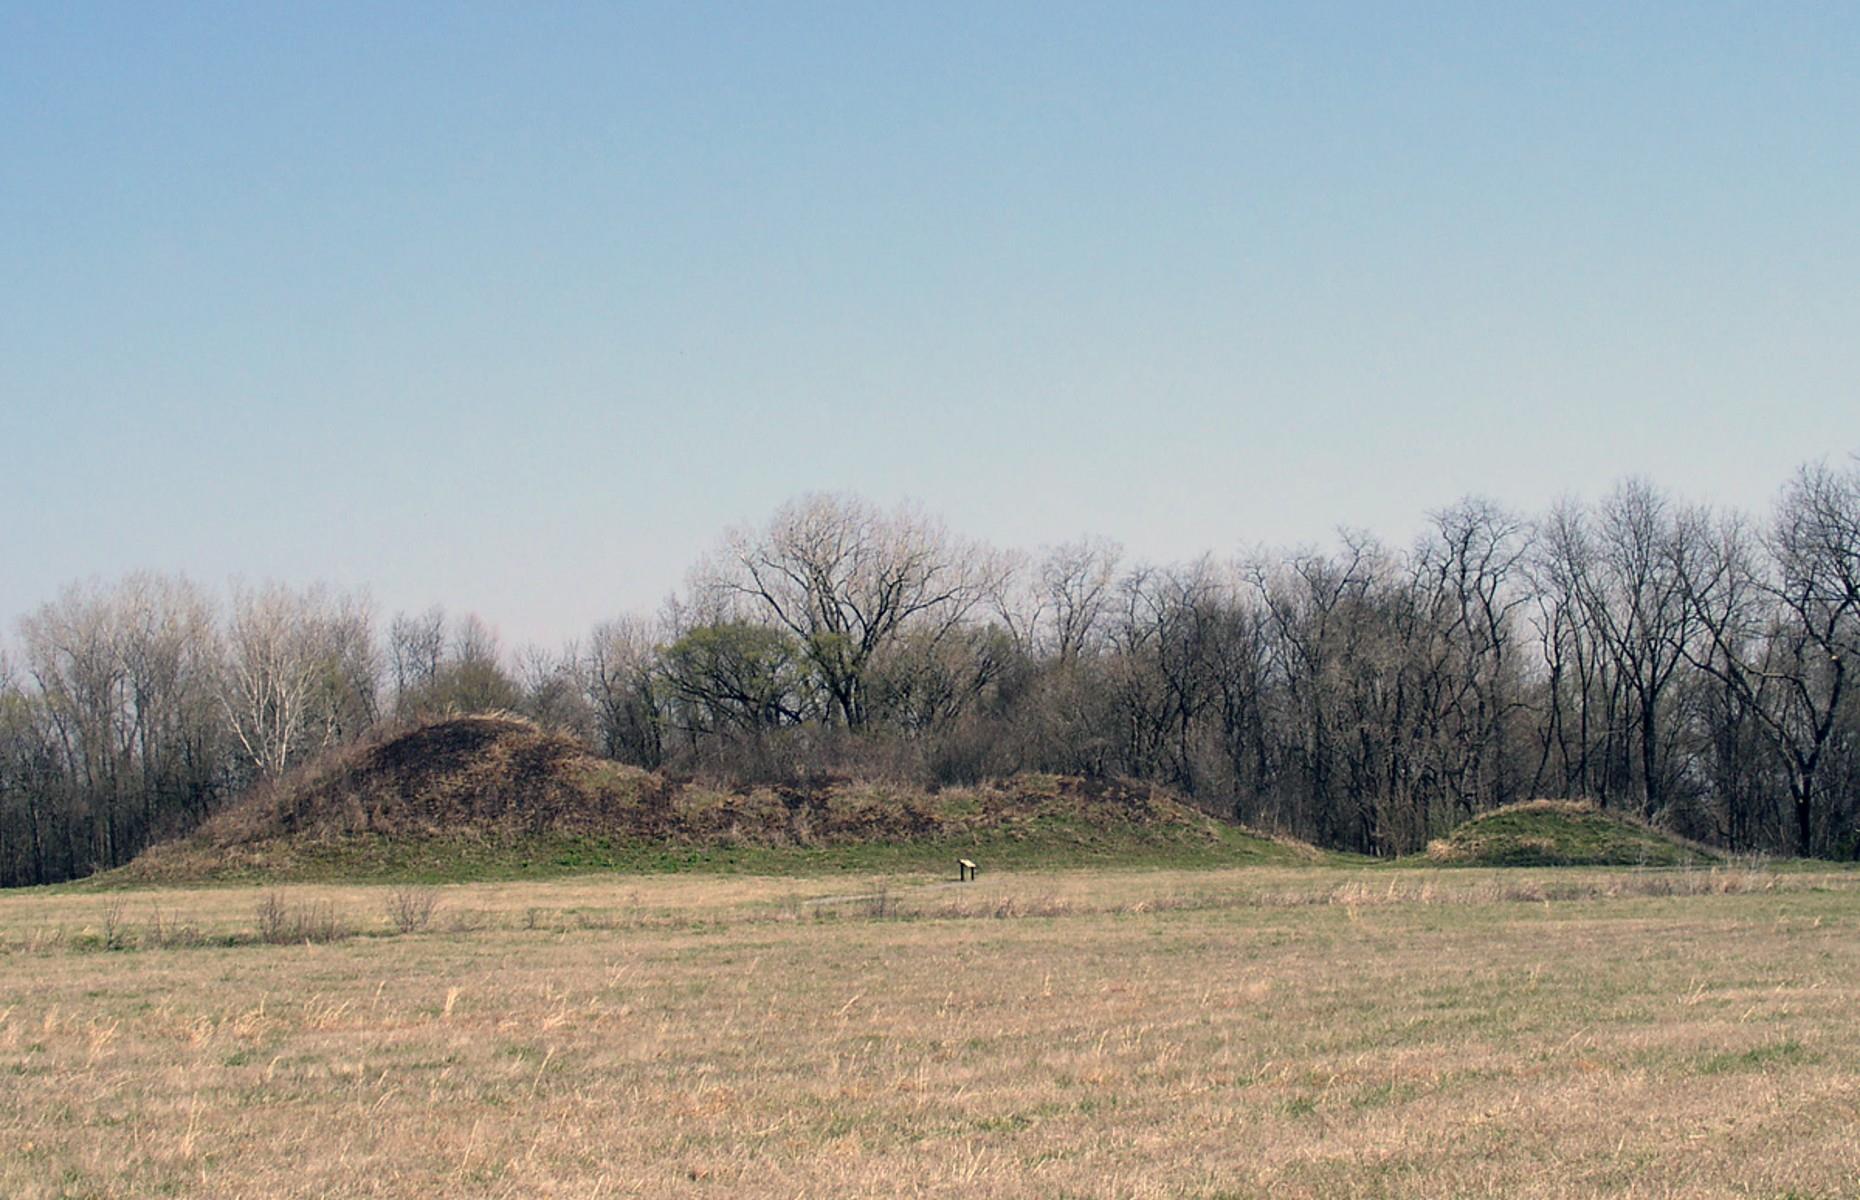 <p>One burial mound, two temple mounds and nine house mounds make up the Spiro Mounds archaeological site – once an important regional and religious centre for the Caddoan Mississippian culture, a prehistoric Native American people whose descendants make up the modern Caddo Nation of Oklahoma. Built and occupied between AD 850 and 1450, the 80-acre site is best known for its burial mound, which has yielded thousands of artefacts despite sustaining heavy damage in the 1930s. The mounds claimed a place on the National Register of Historic Places in 1969, and remain Oklahoma's only prehistoric Native American archaeological site open to the public.</p>